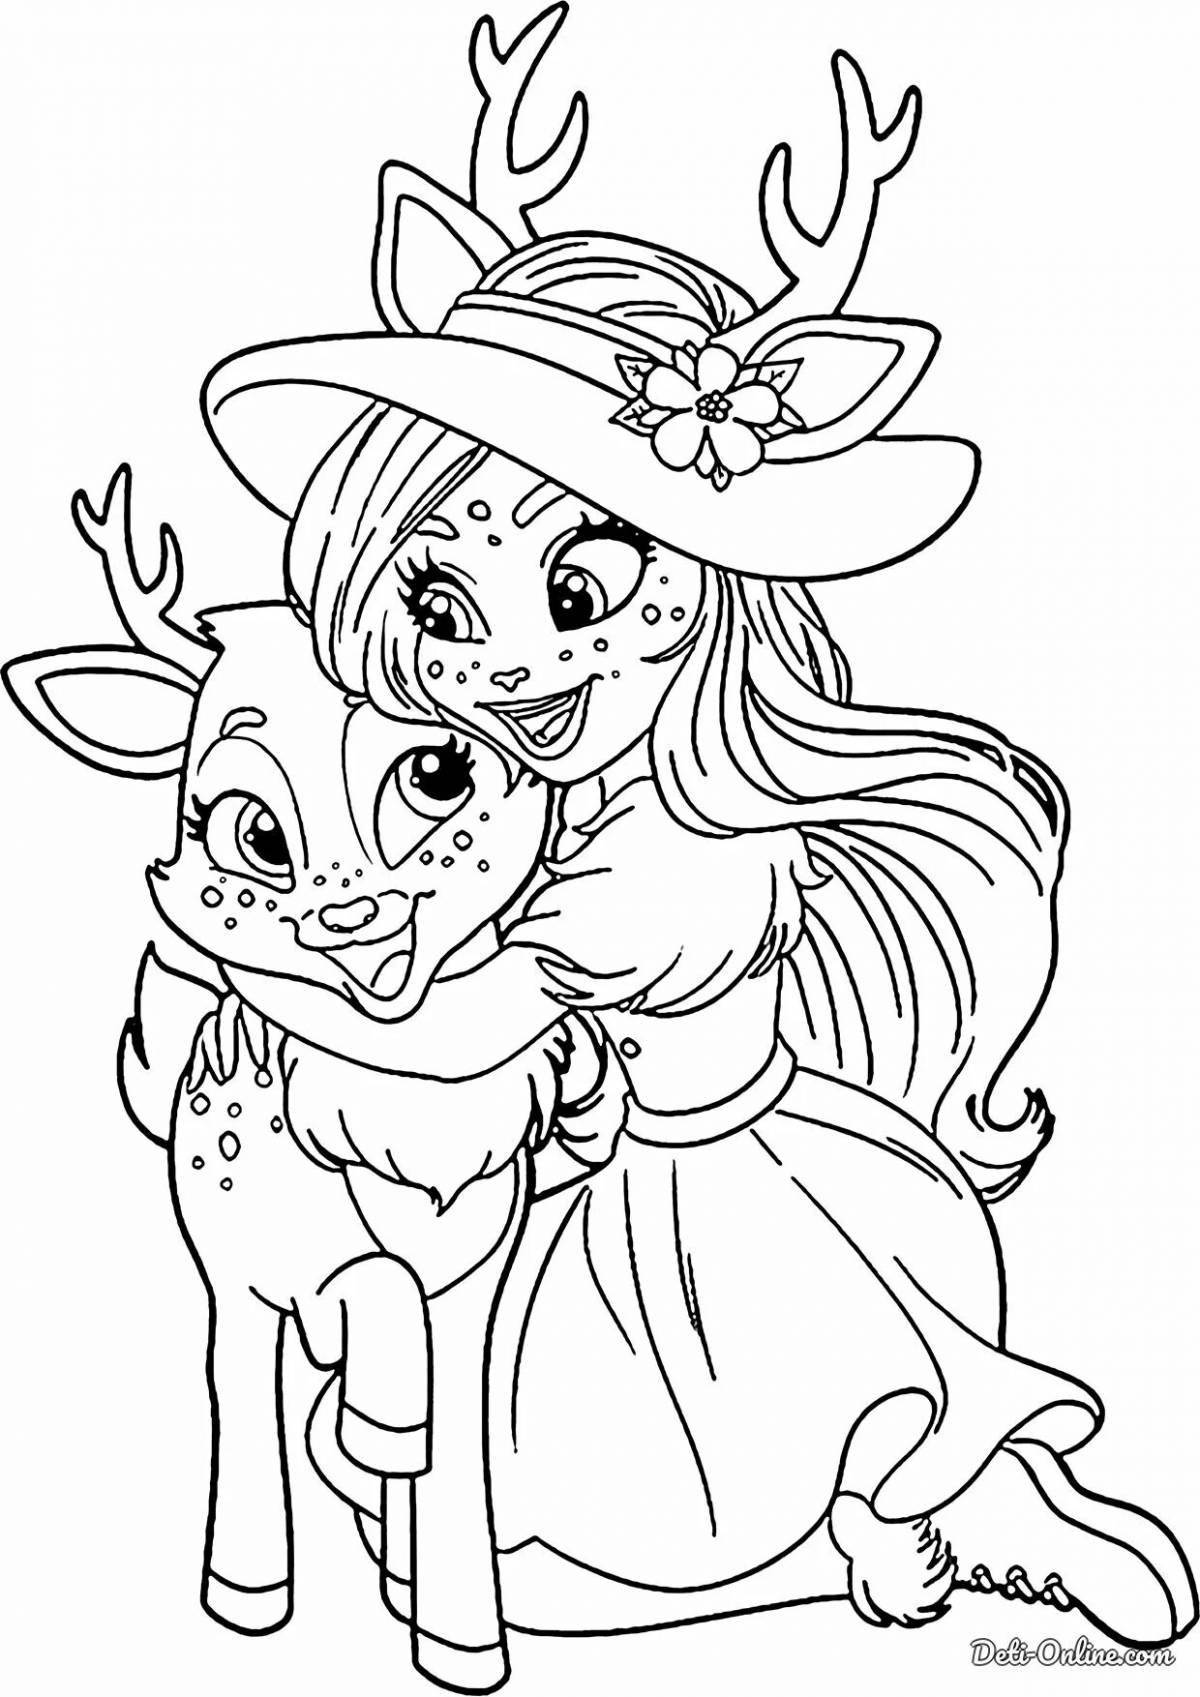 Cute coloring book for girls with 9 year old animals